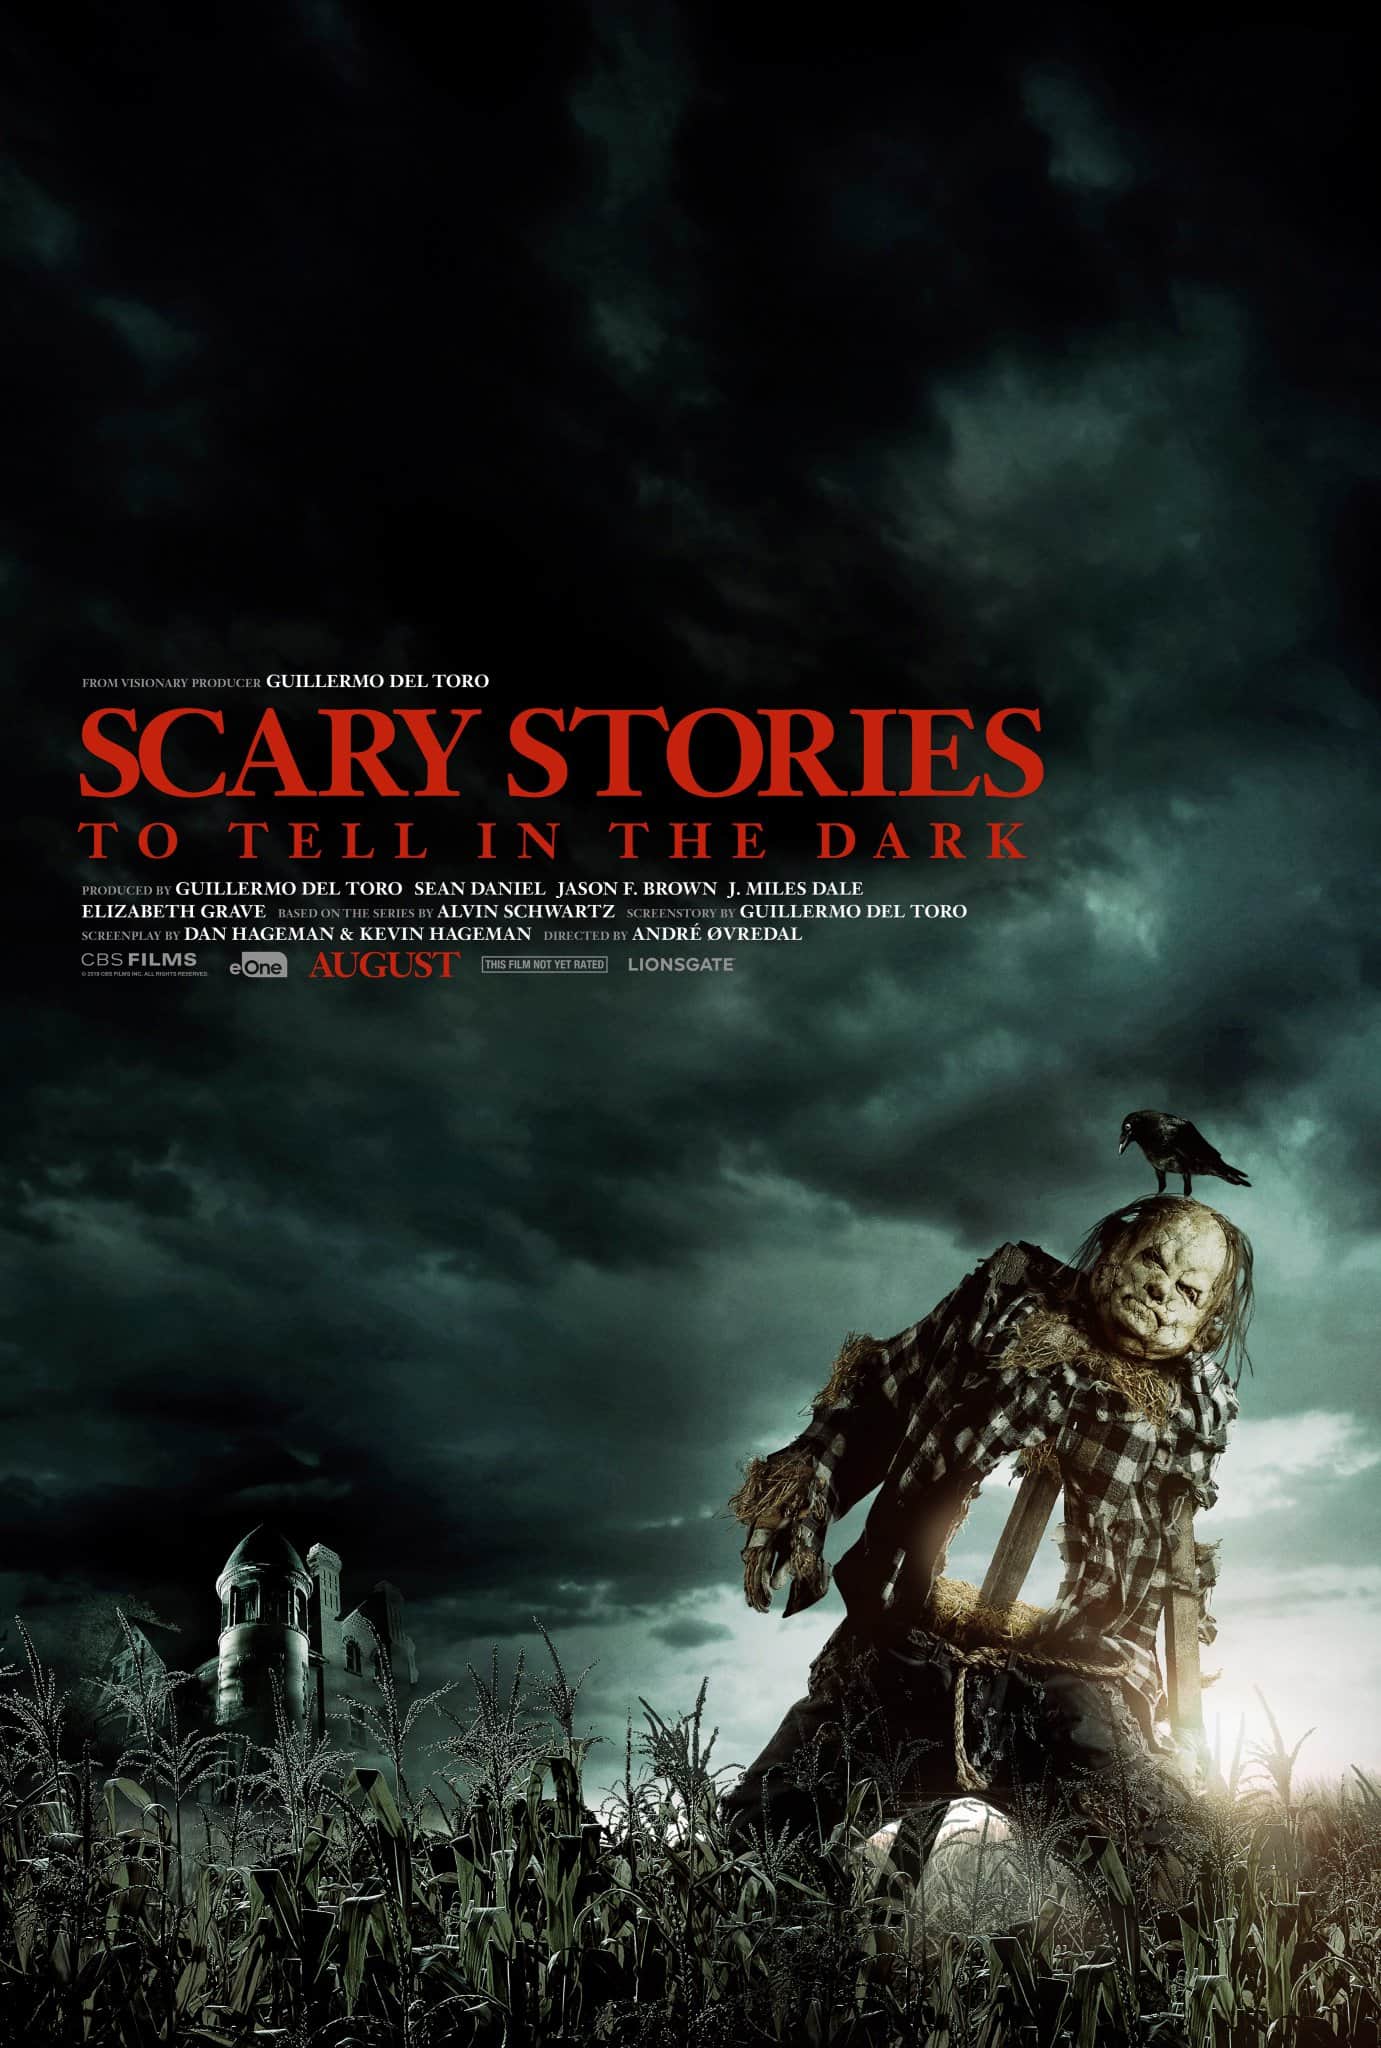 Scary stories to tell in the dark trailer